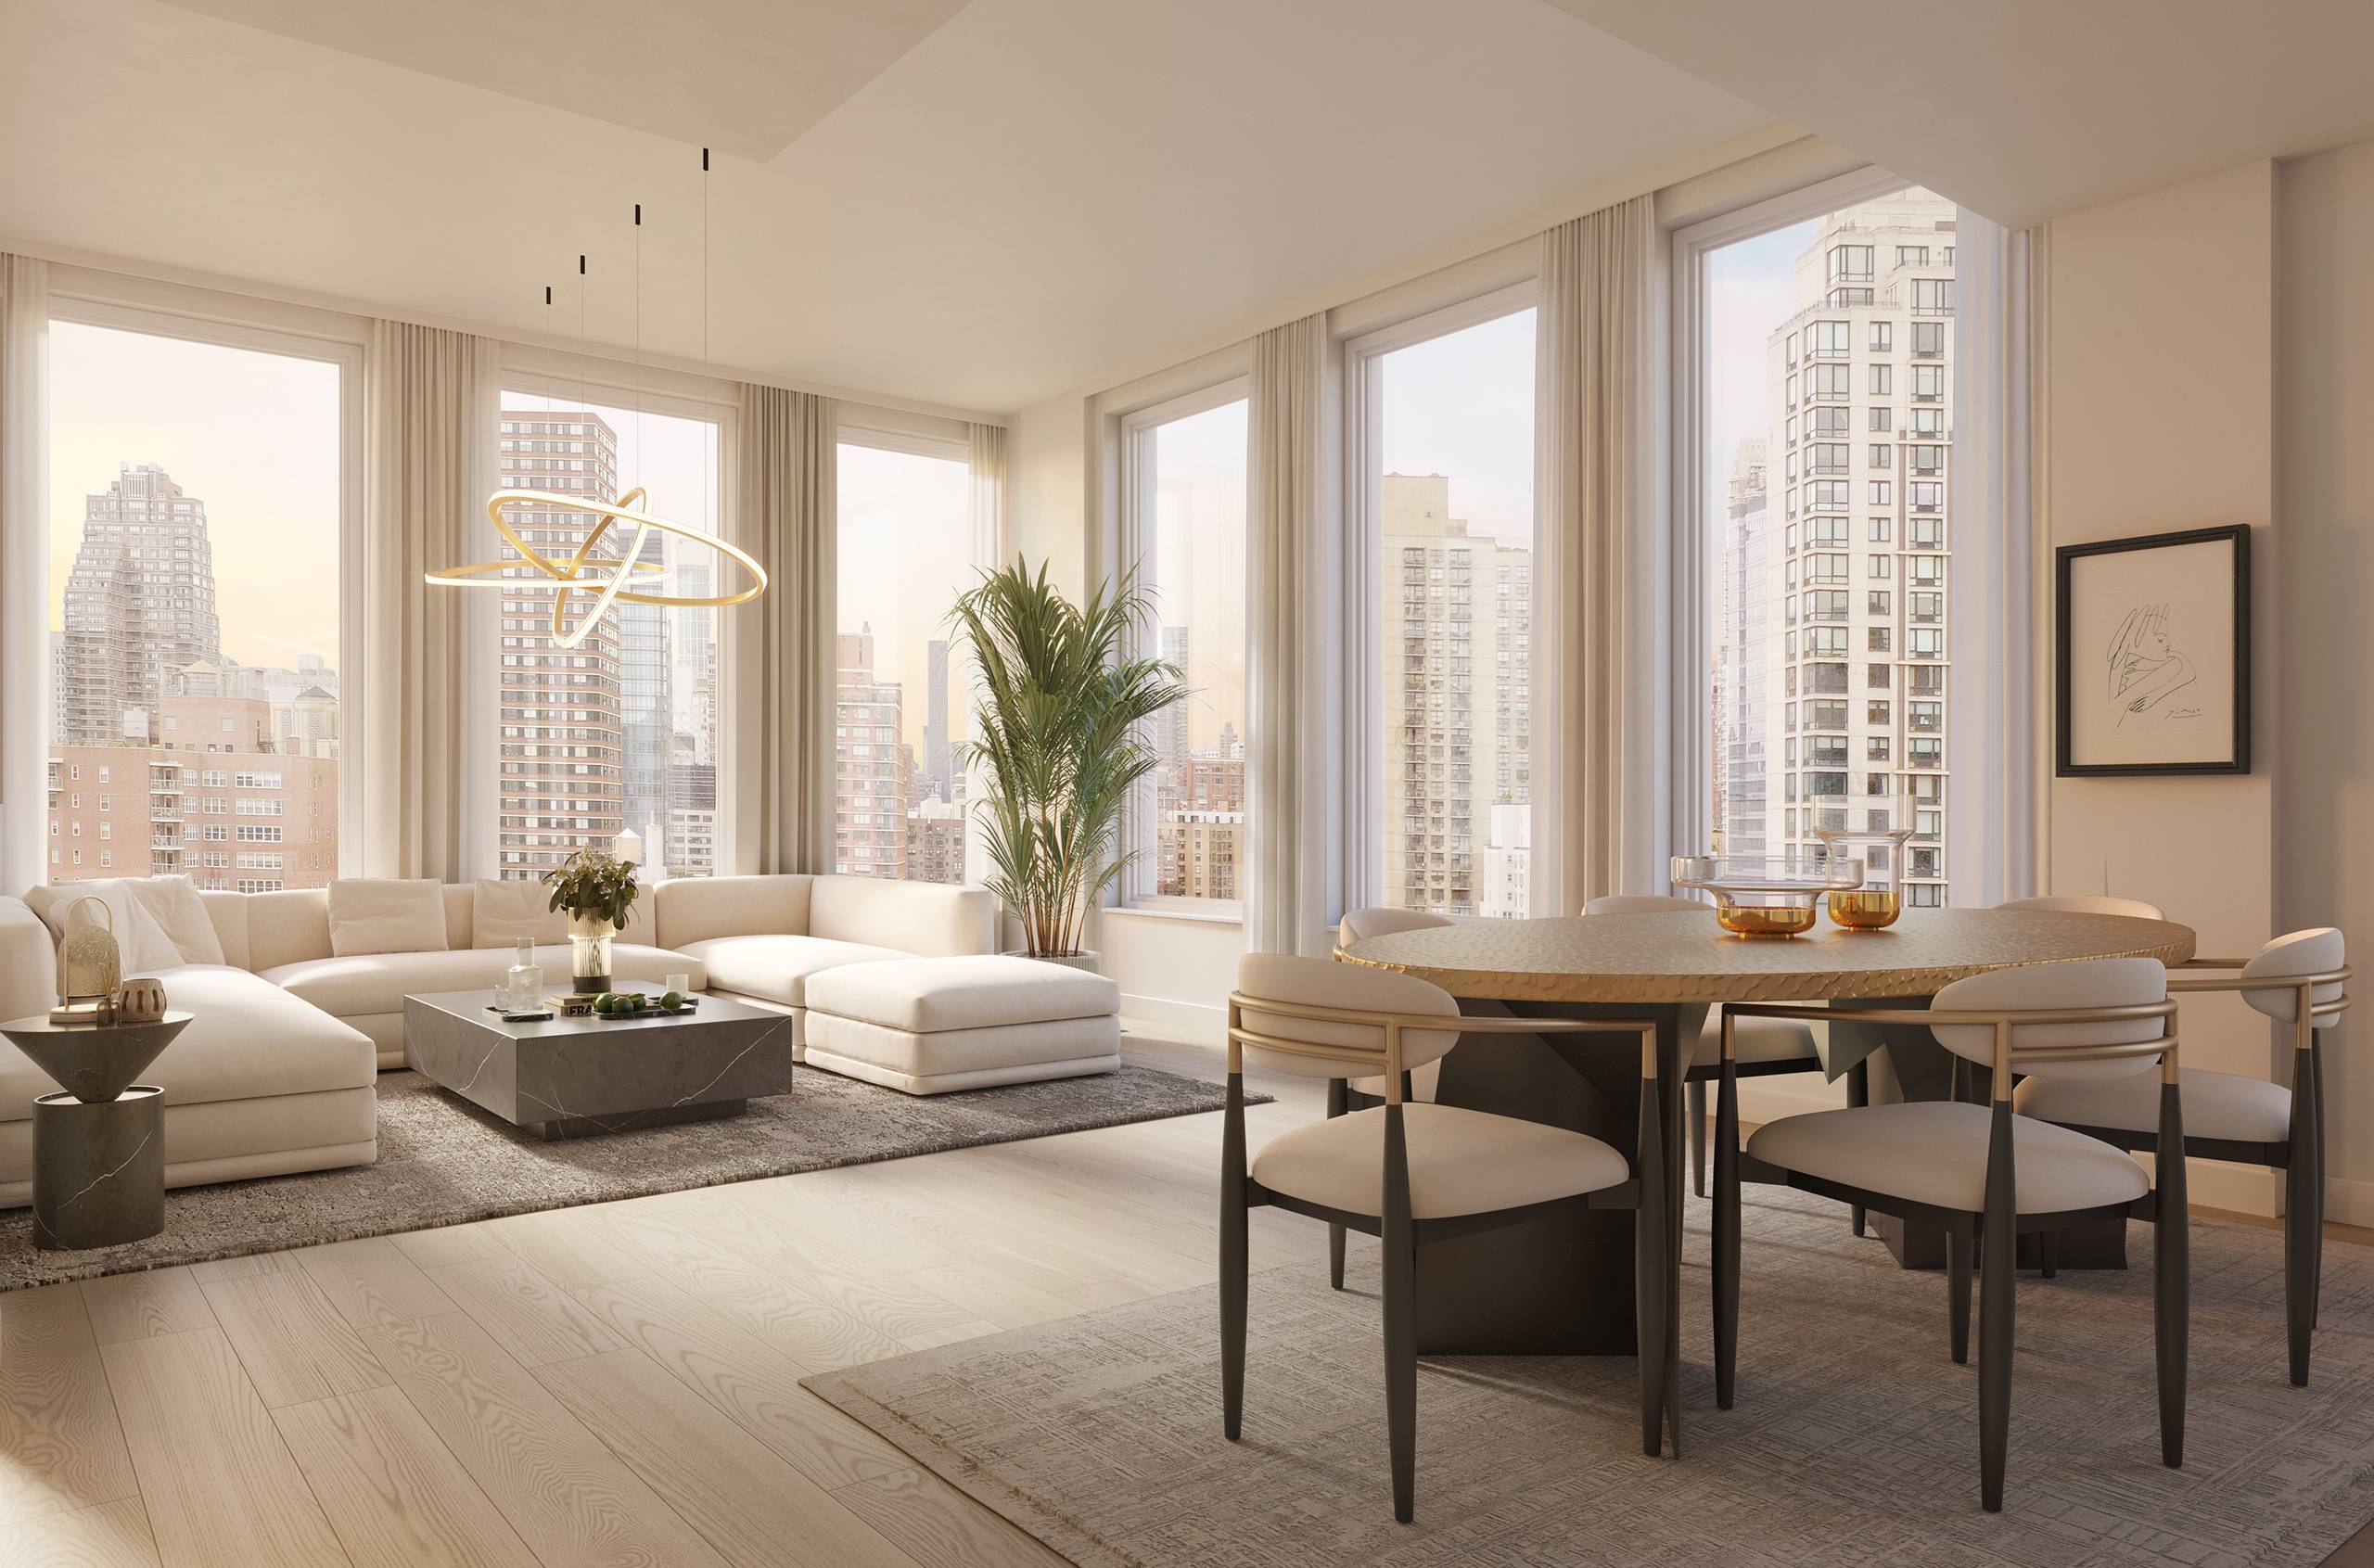 LUXURY NEW DEVEOPMENT CONDO IN THE HEART OF THE UPPER EAST SIDE